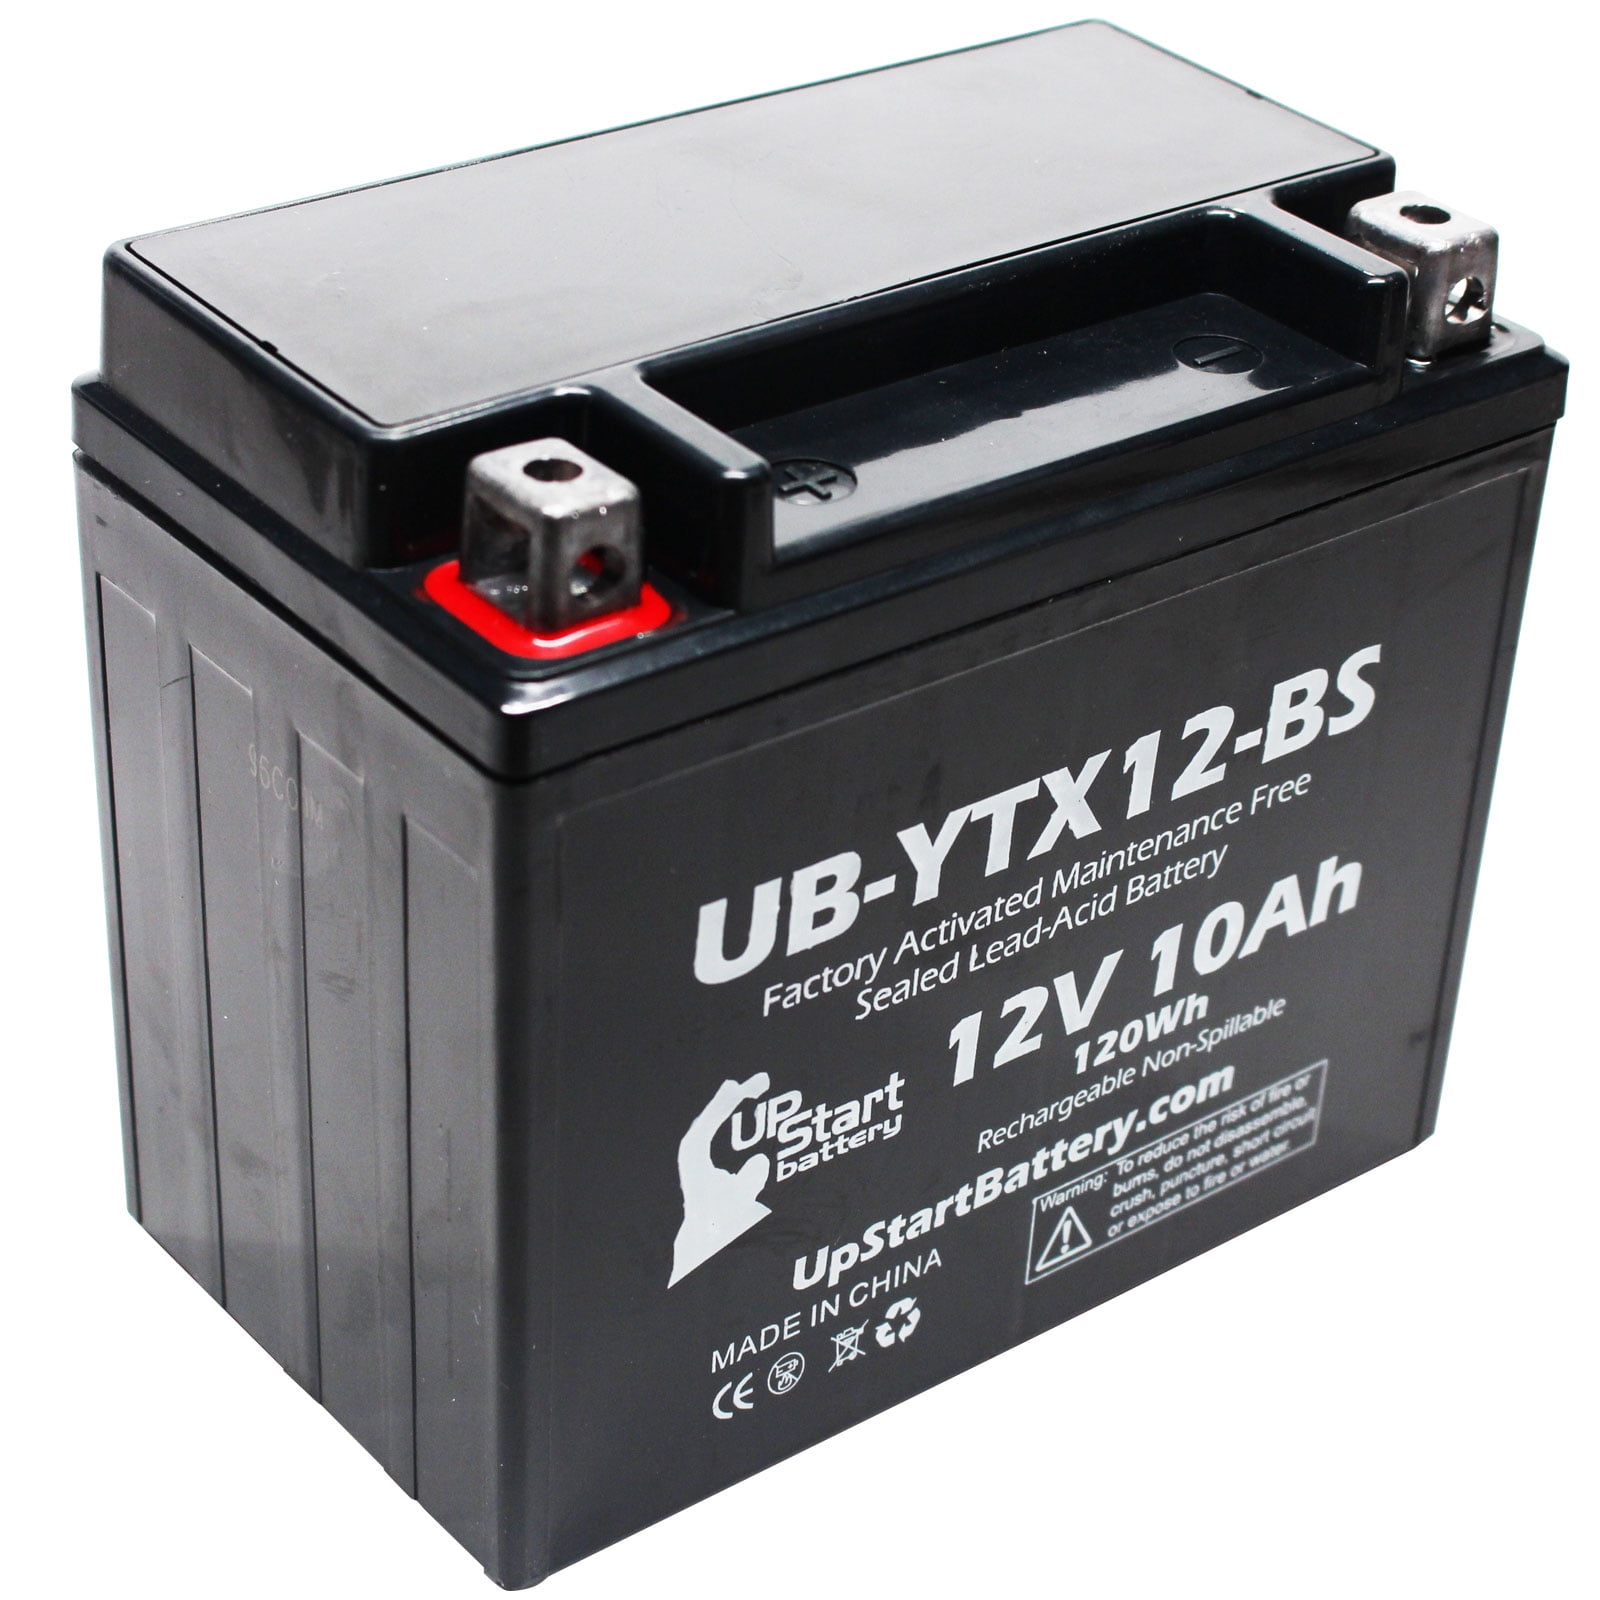 UB-YTZ10S-BS excl. R6S 600CC Factory Activated 8.6Ah Motorcycle Battery Replacement for 2009 Yamaha YZF-R6 12V Maintenance Free 